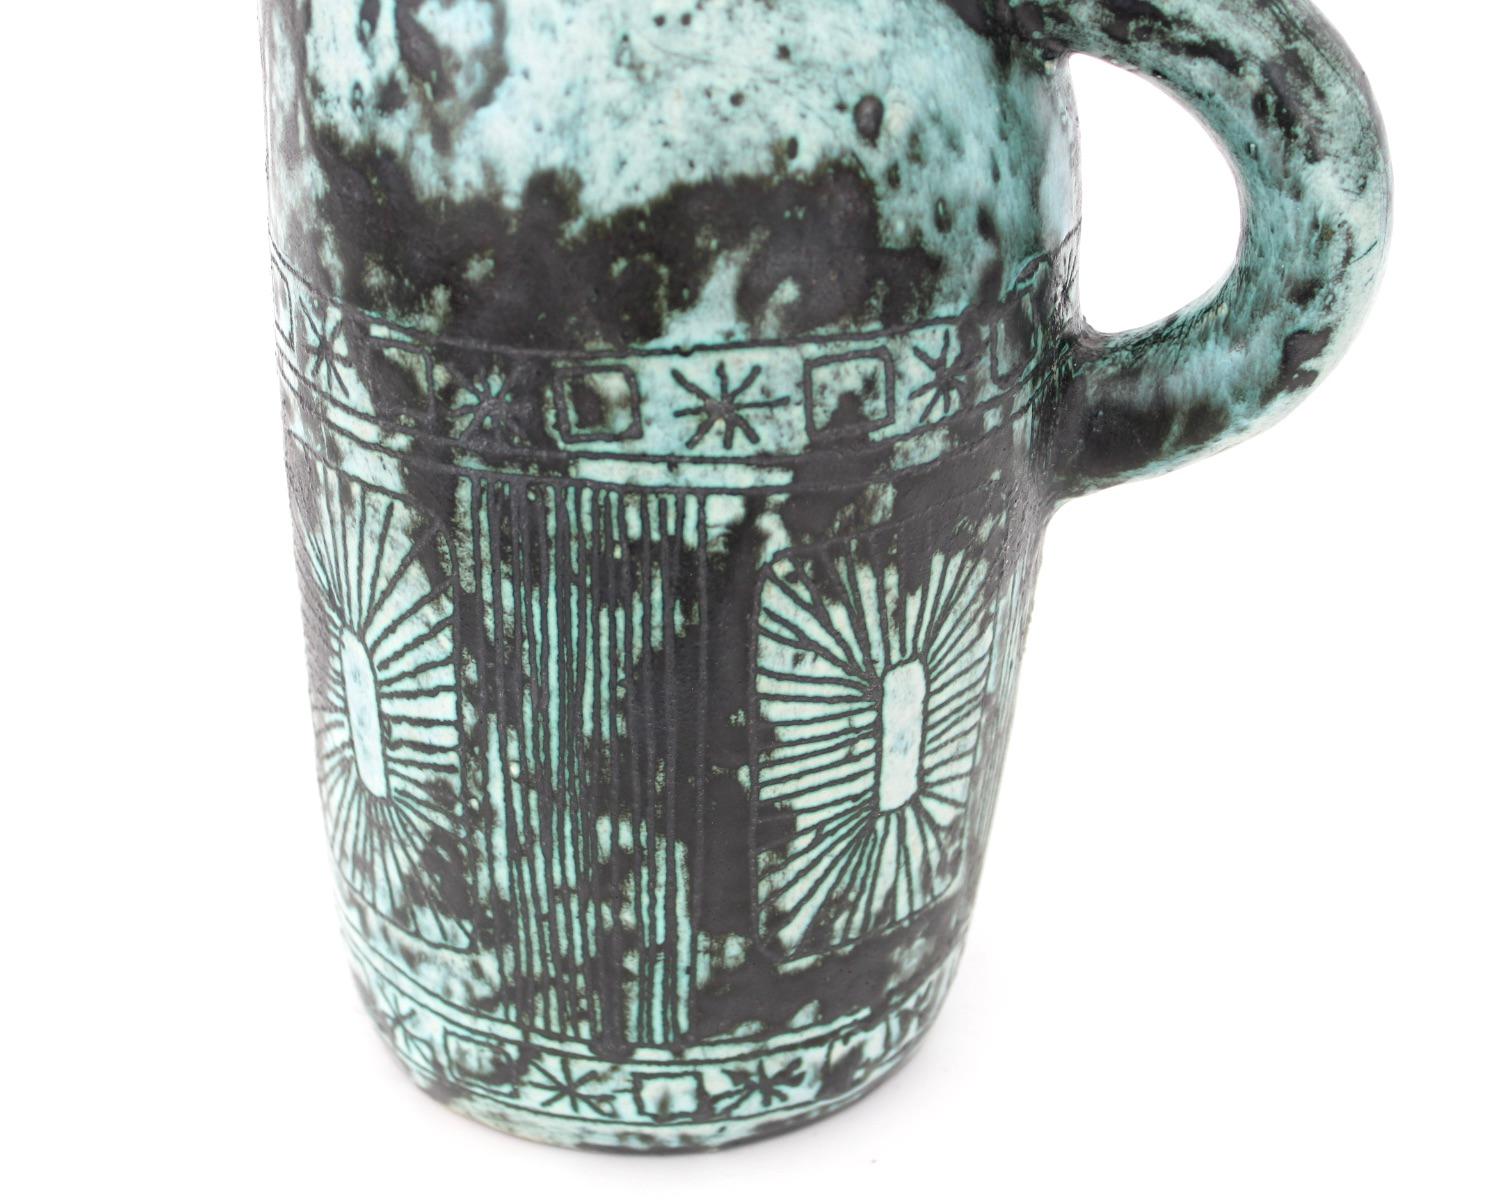 Jacques Blin French Ceramic Artist Pitcher With Iconic Blue Glaze and Decoration For Sale 6